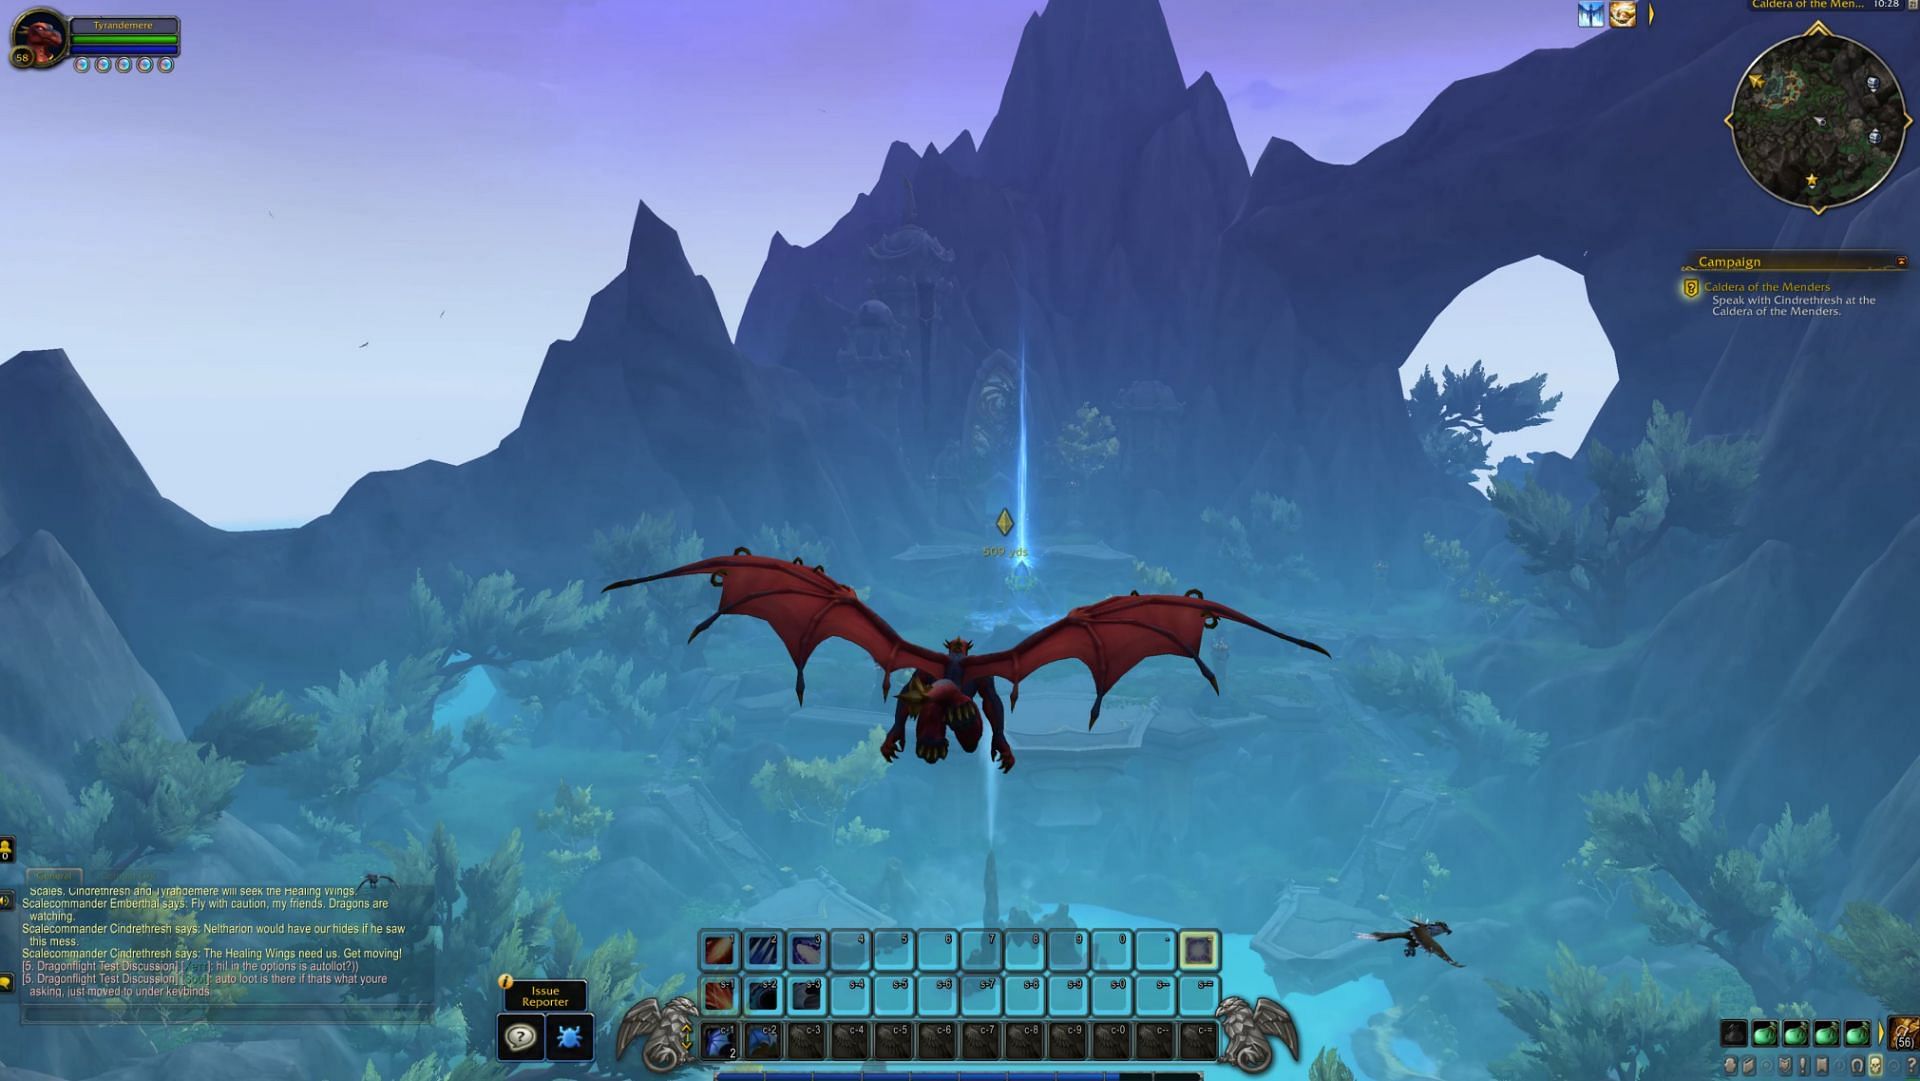 World of Warcraft: Dragonflight had another update to its alpha test, this time for the Dracthyr starting area (Image via Blizzard Entertainment)